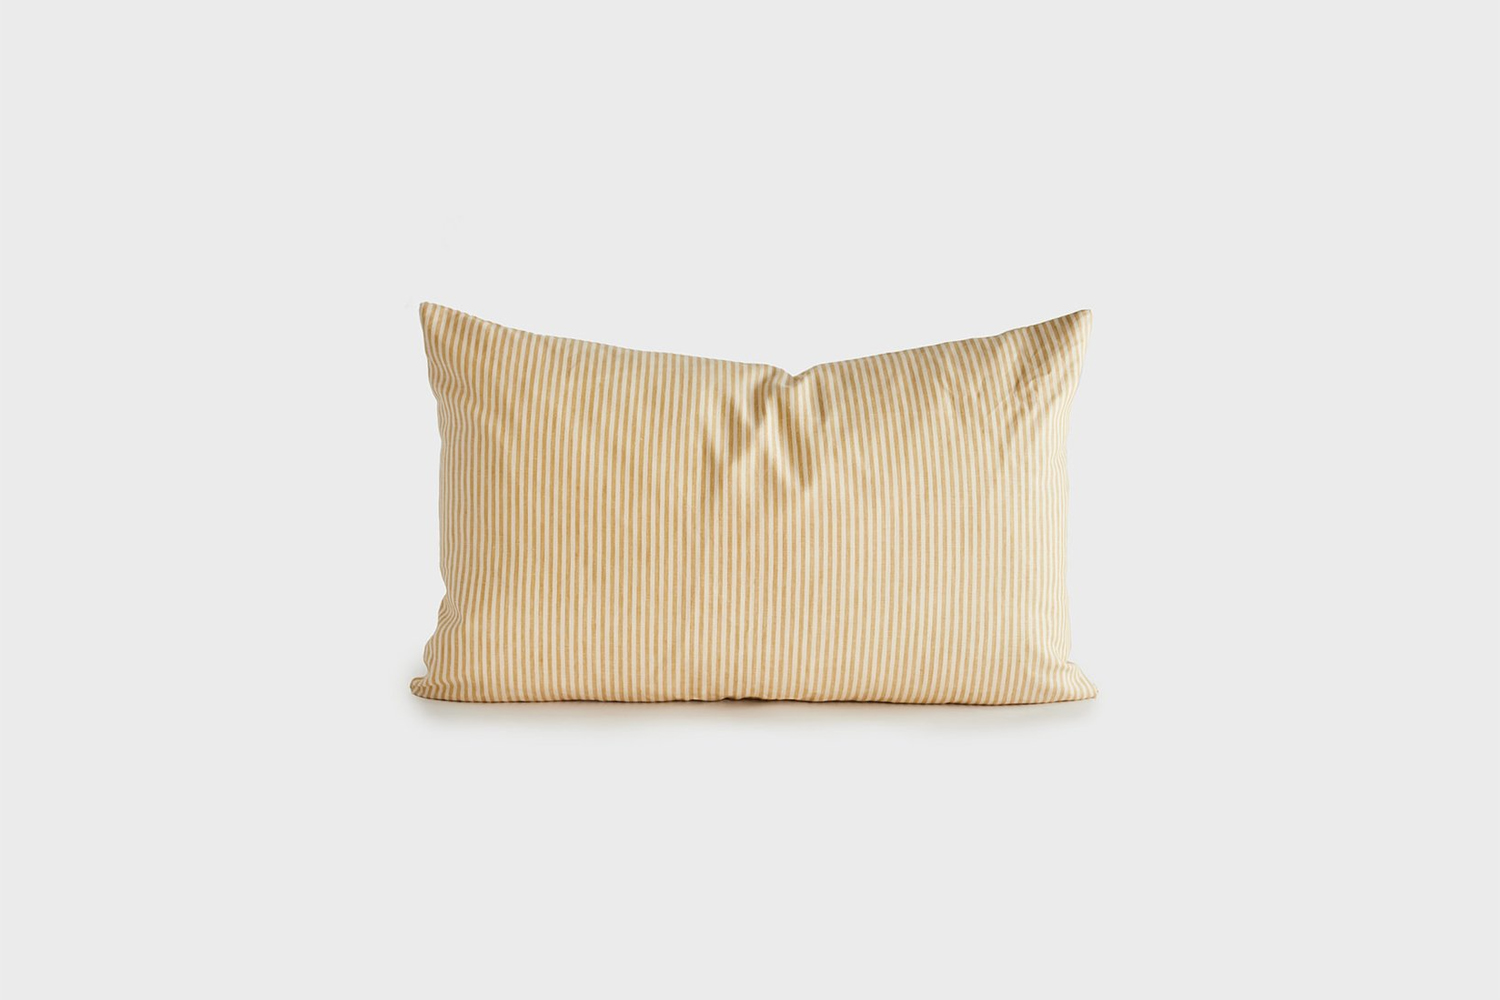 the apricot and cream striped lumbar pillow is \$375 at sunday shop. 23